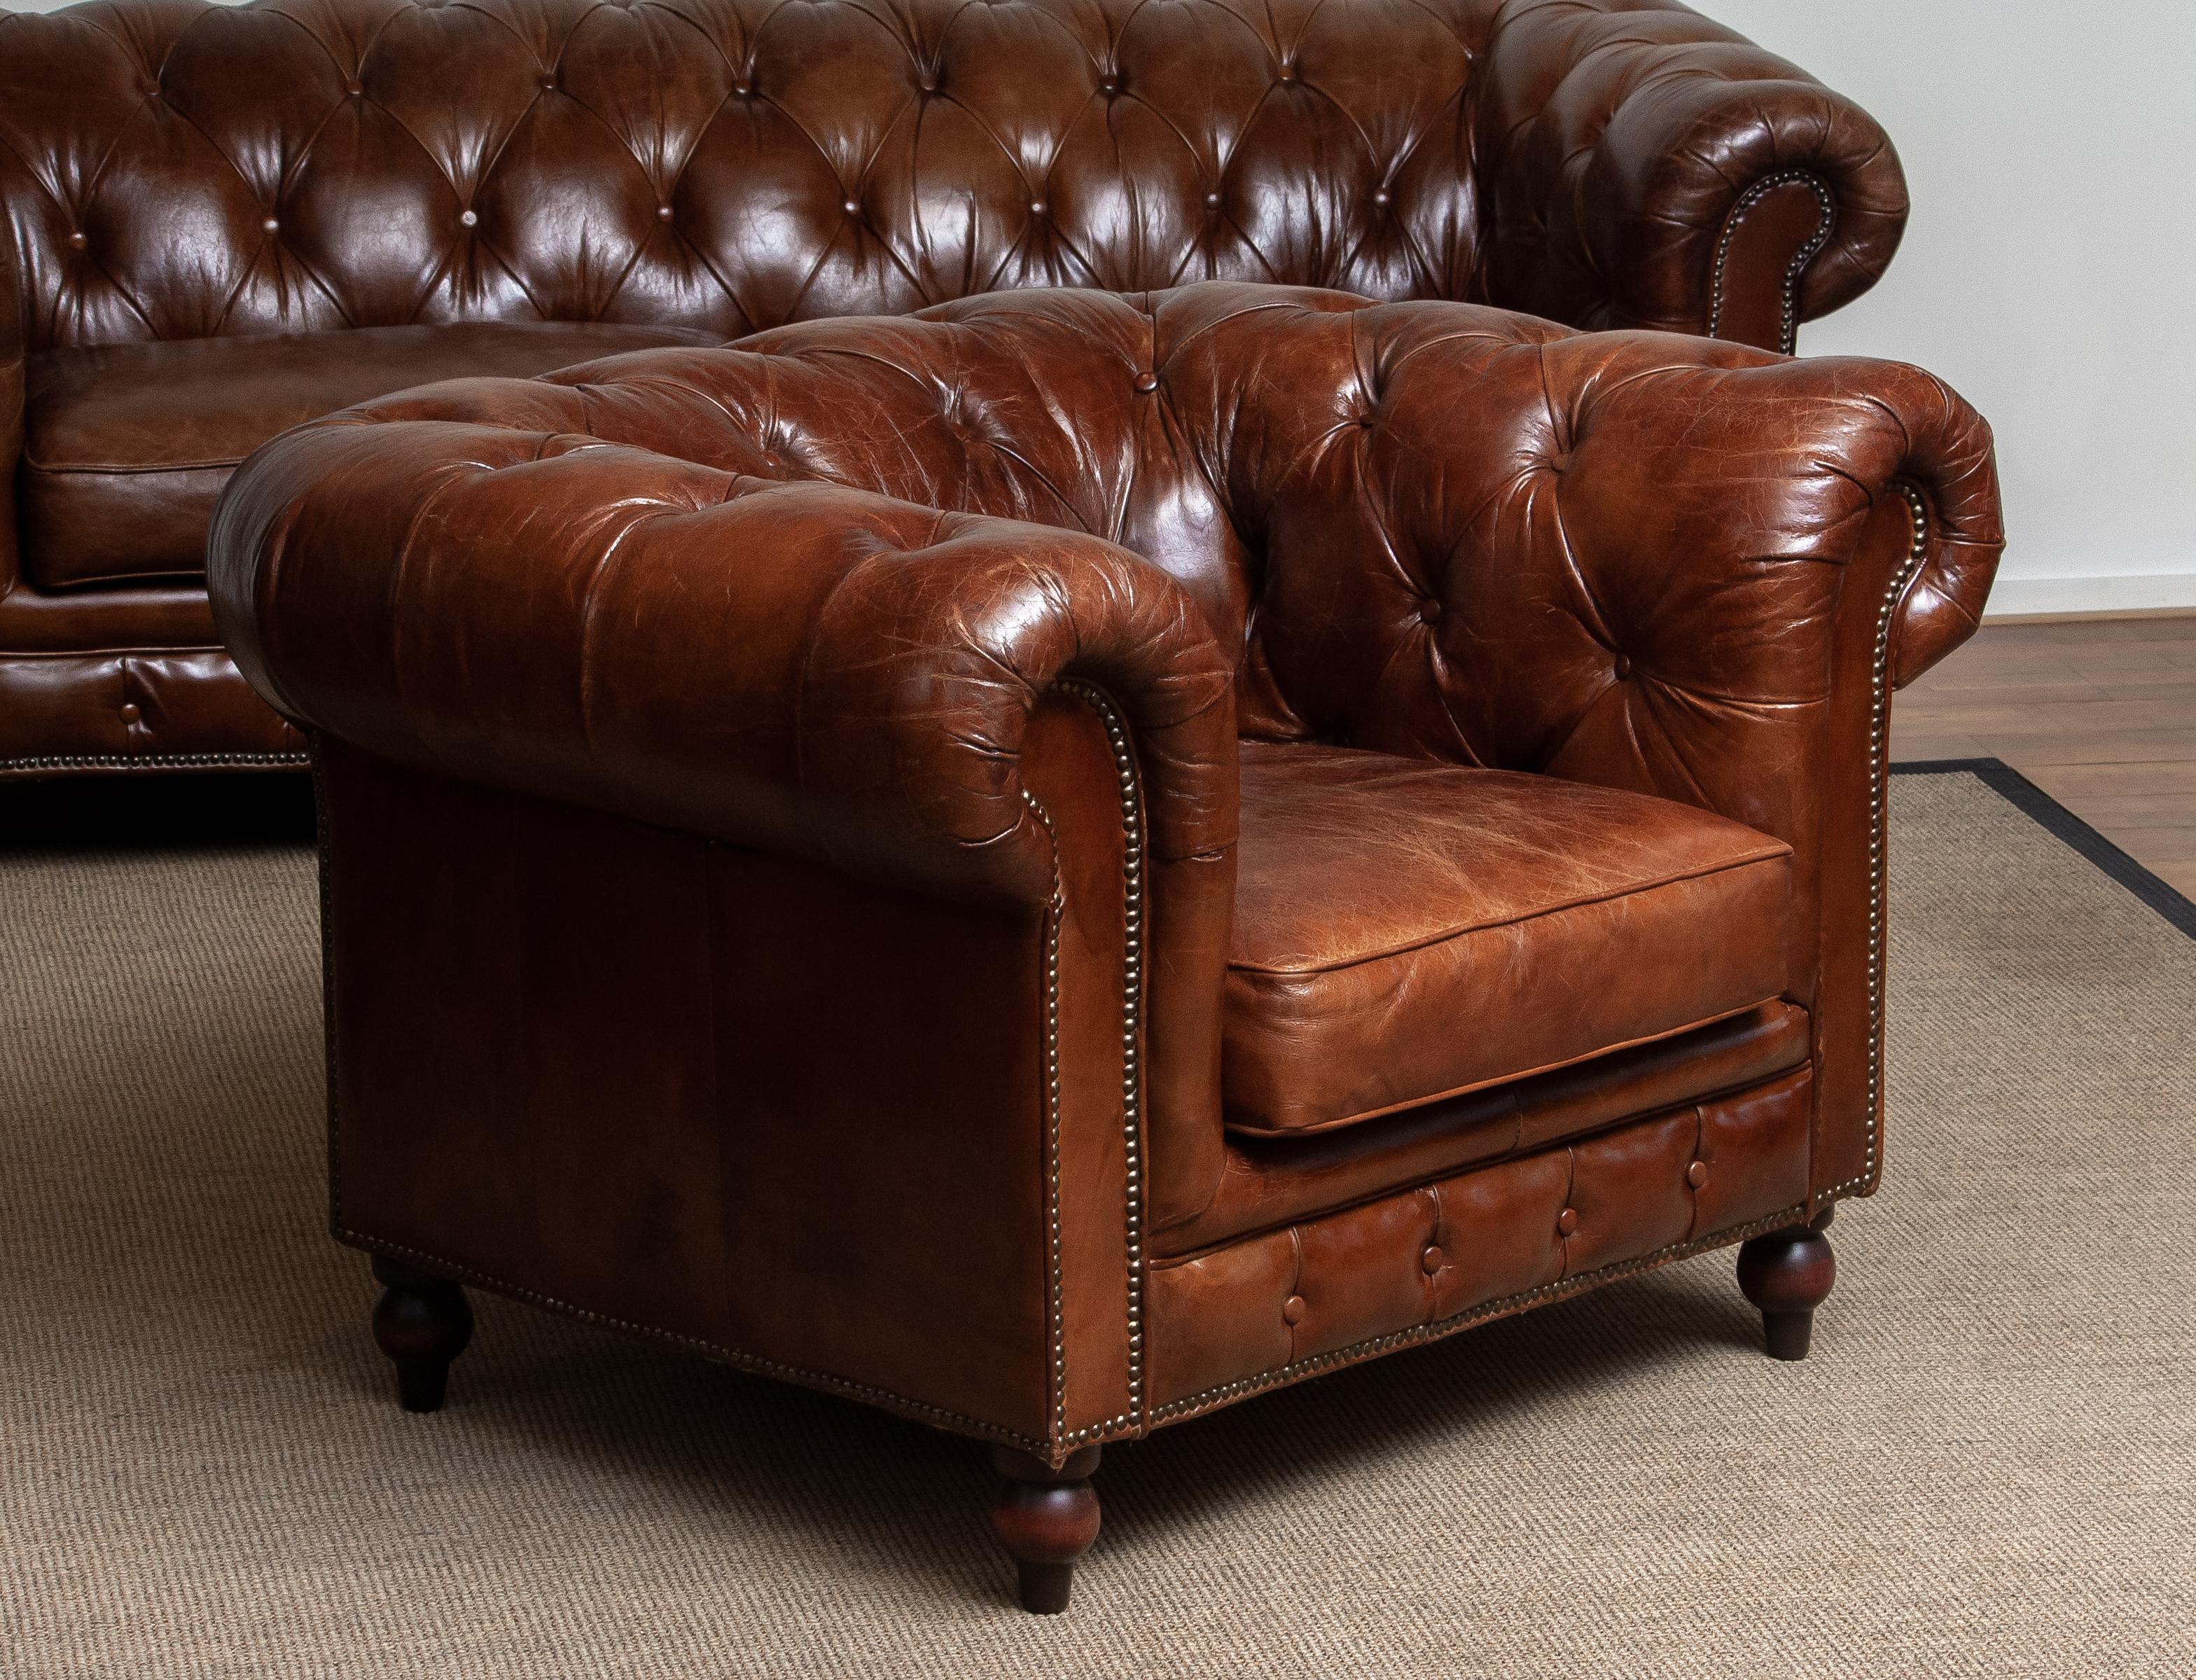 Tufted Brown Leather English Chesterfield Sofa from the 20th Century 12